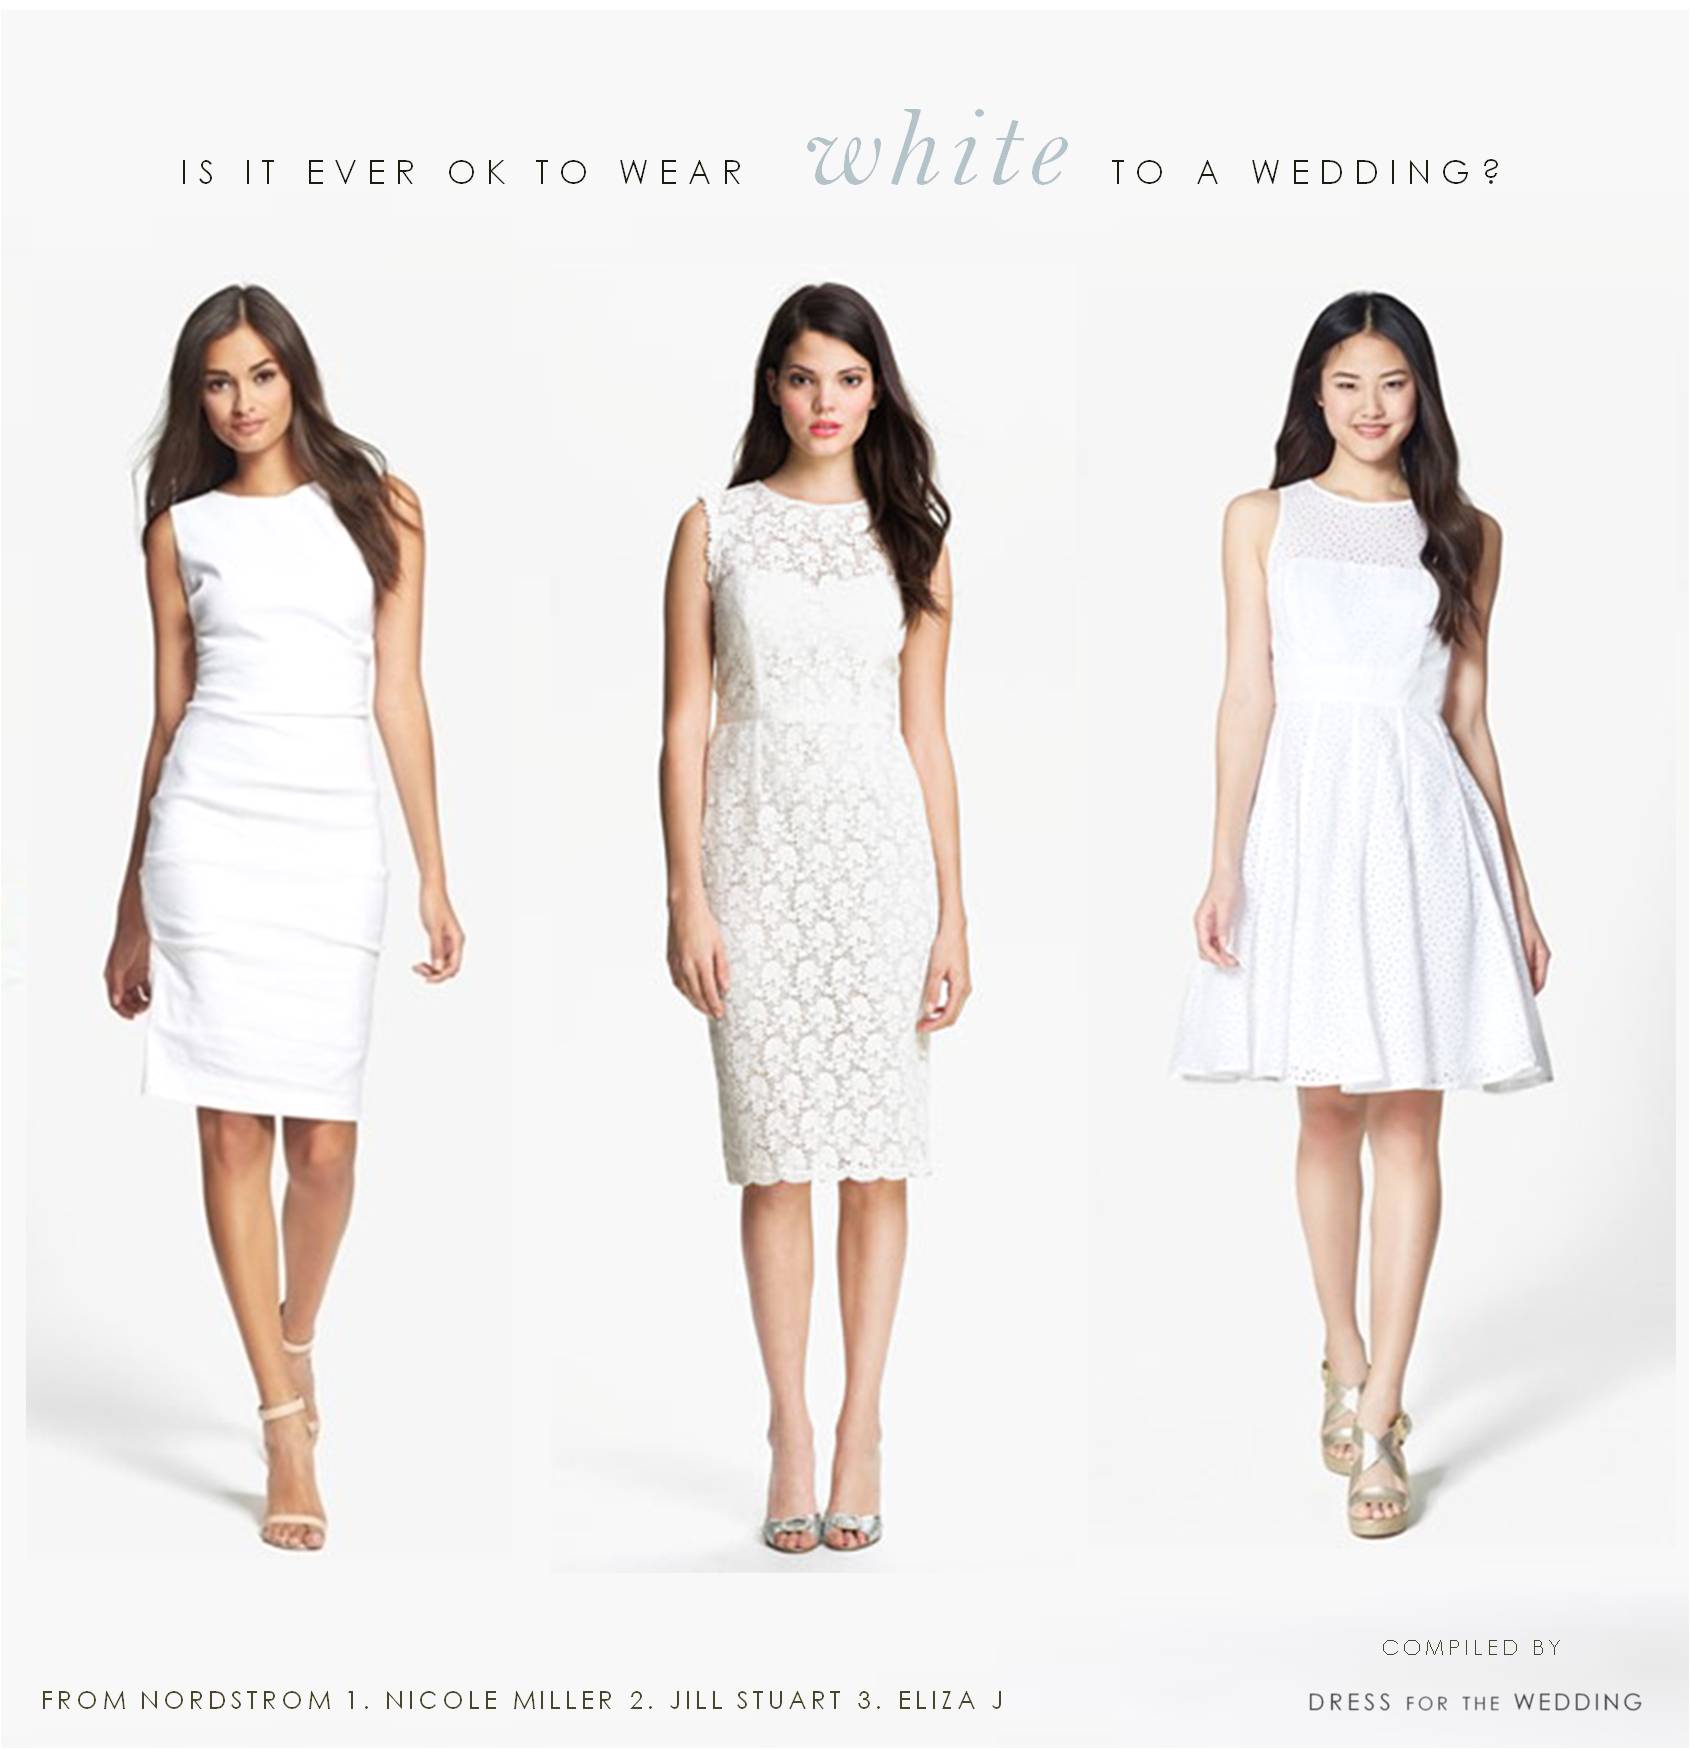 Can I Wear White to a Wedding?